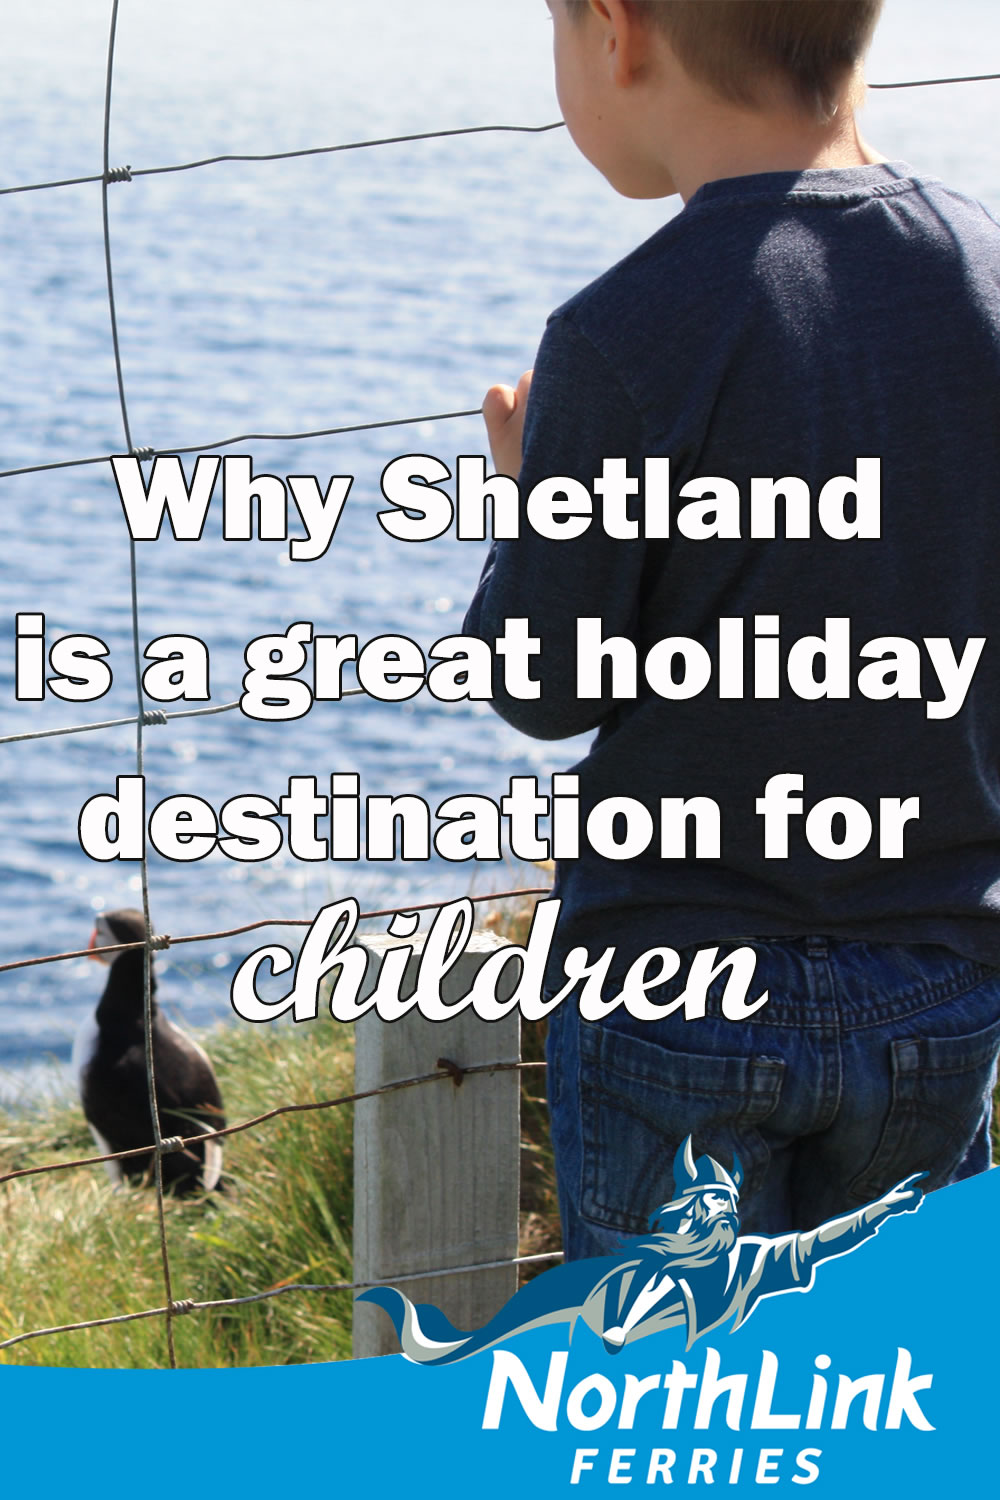 Why Shetland is a great holiday destination for children